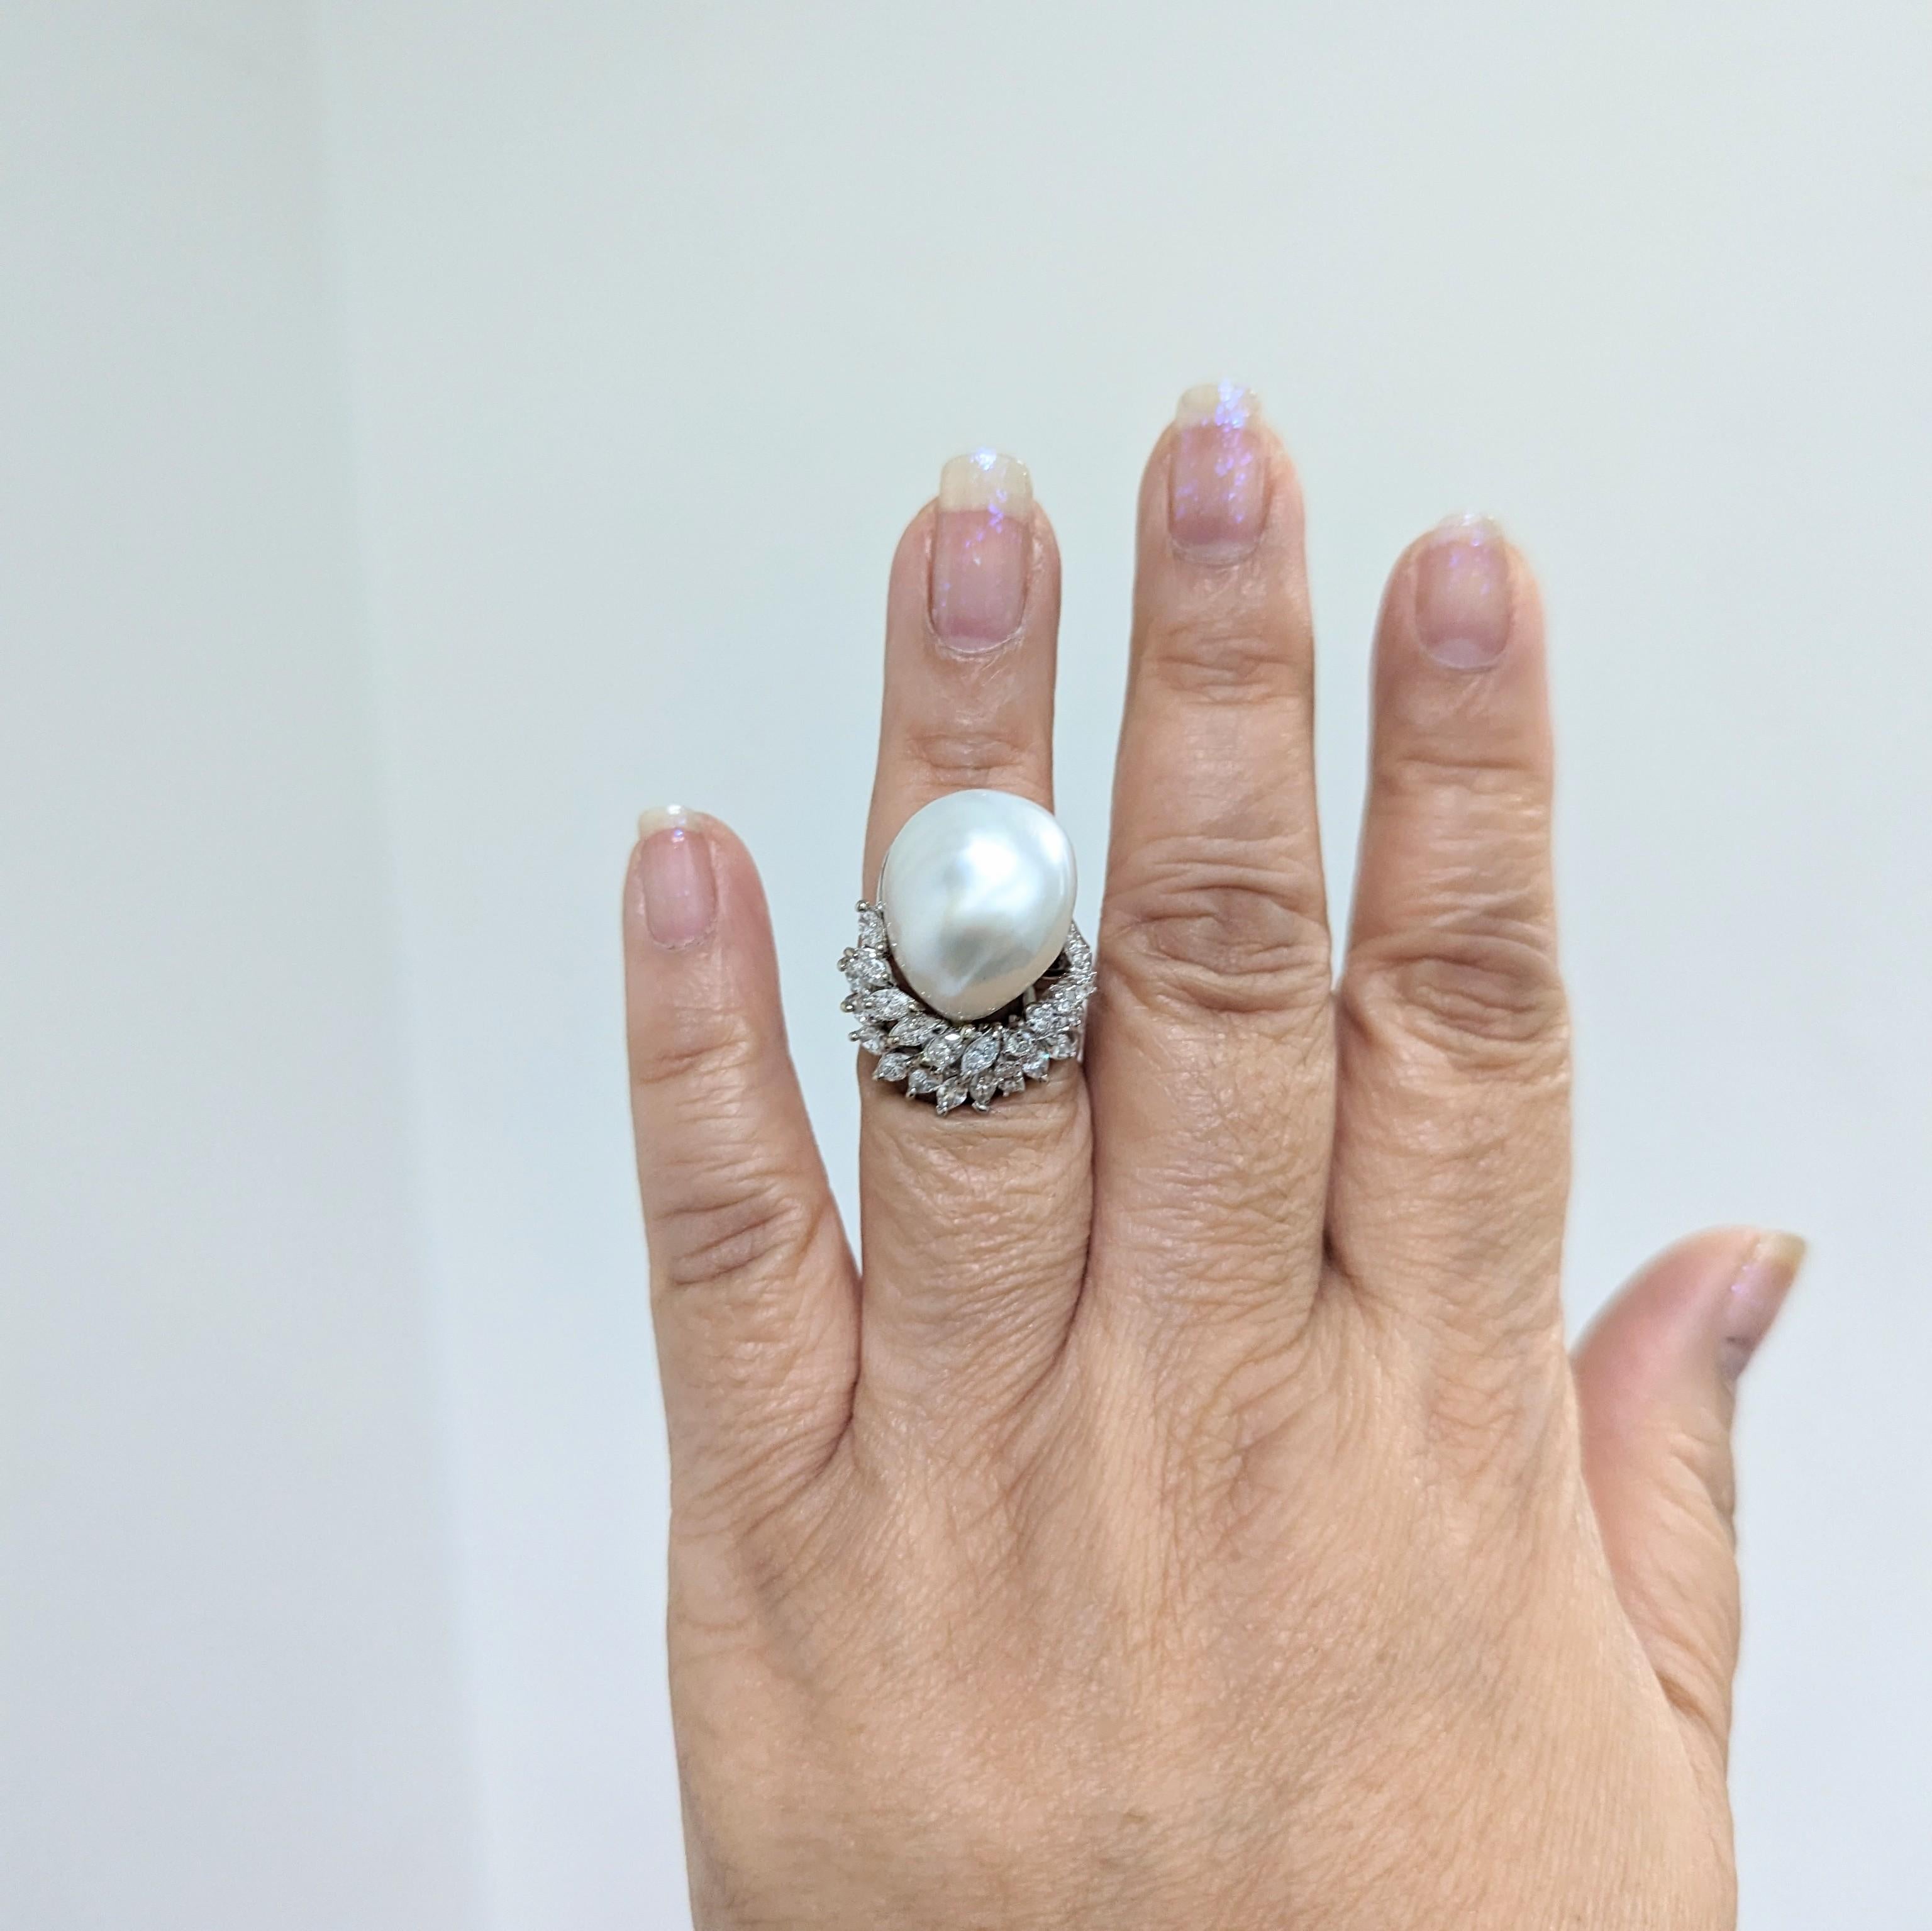 Beautiful large white South Sea baroque pearl with 1.50 ct. white diamond rounds and marquise shapes.  Handmade in platinum.  Ring size 6.